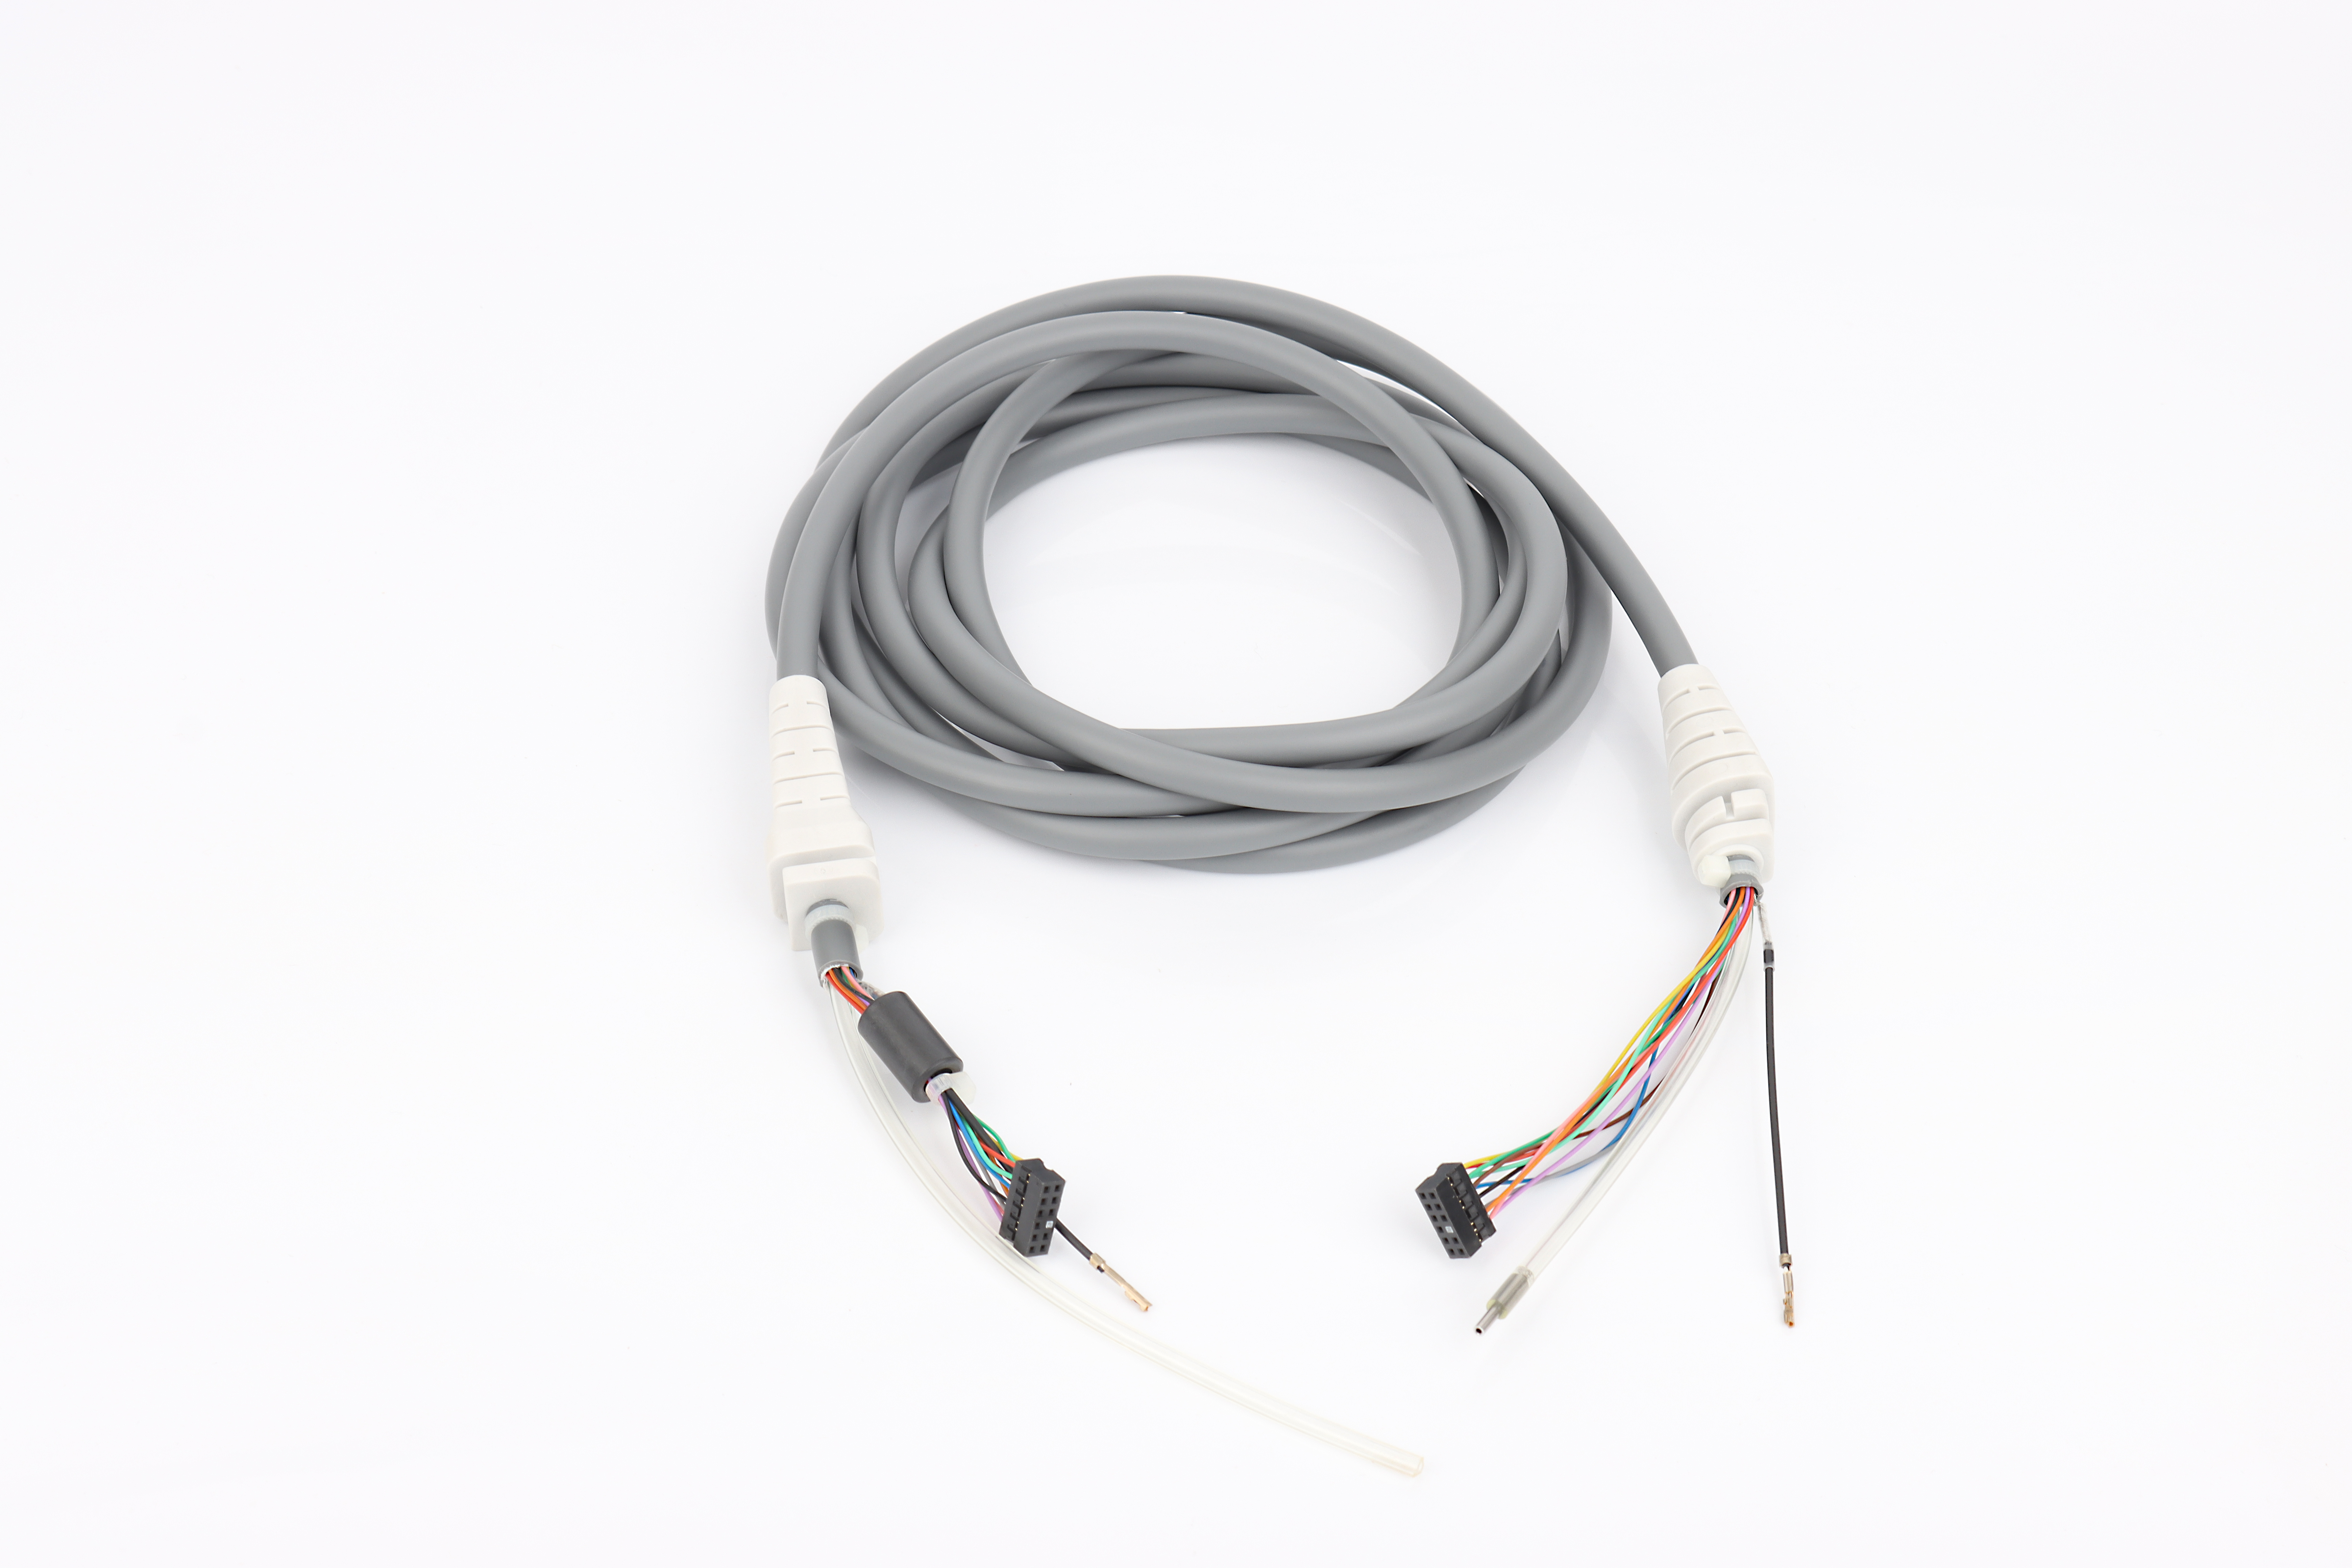 Cable assembly for Screening Tympanometer